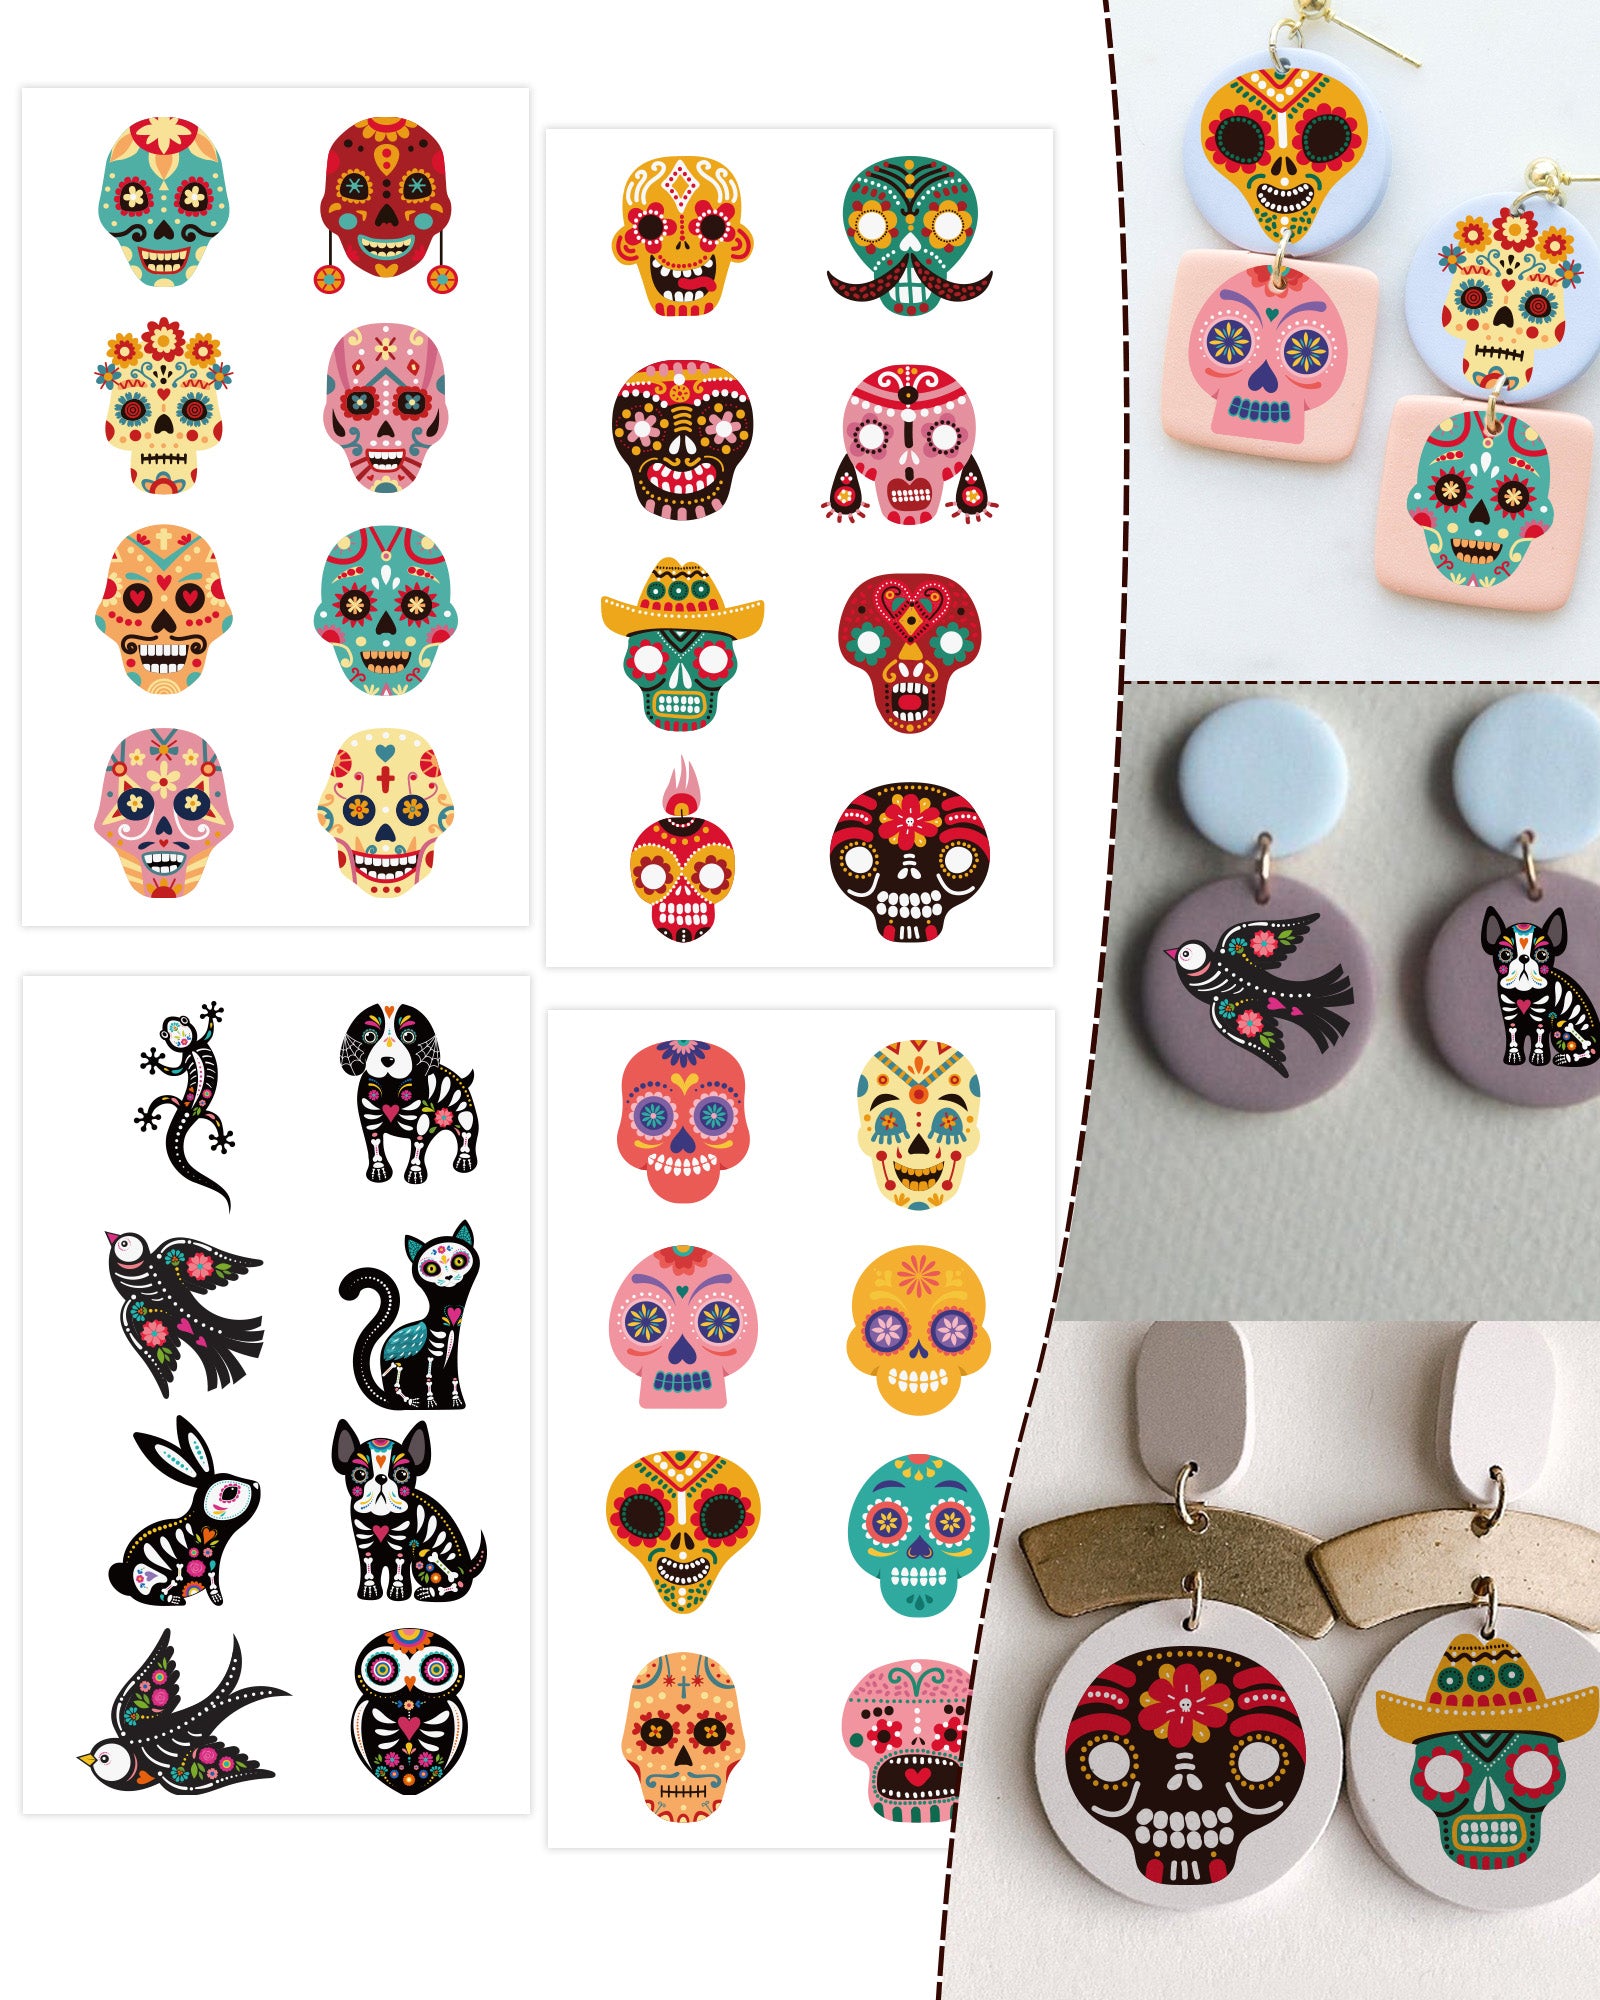  Puocaon Transfer Paper Polymer Clay - 4 Design 20 Pcs Day of  the Dead Transfer Sheets for Polymer Clay Jewelry, Floral Guitar Skull  Design Water Soluble Polymer Clay Transfer Sheets for